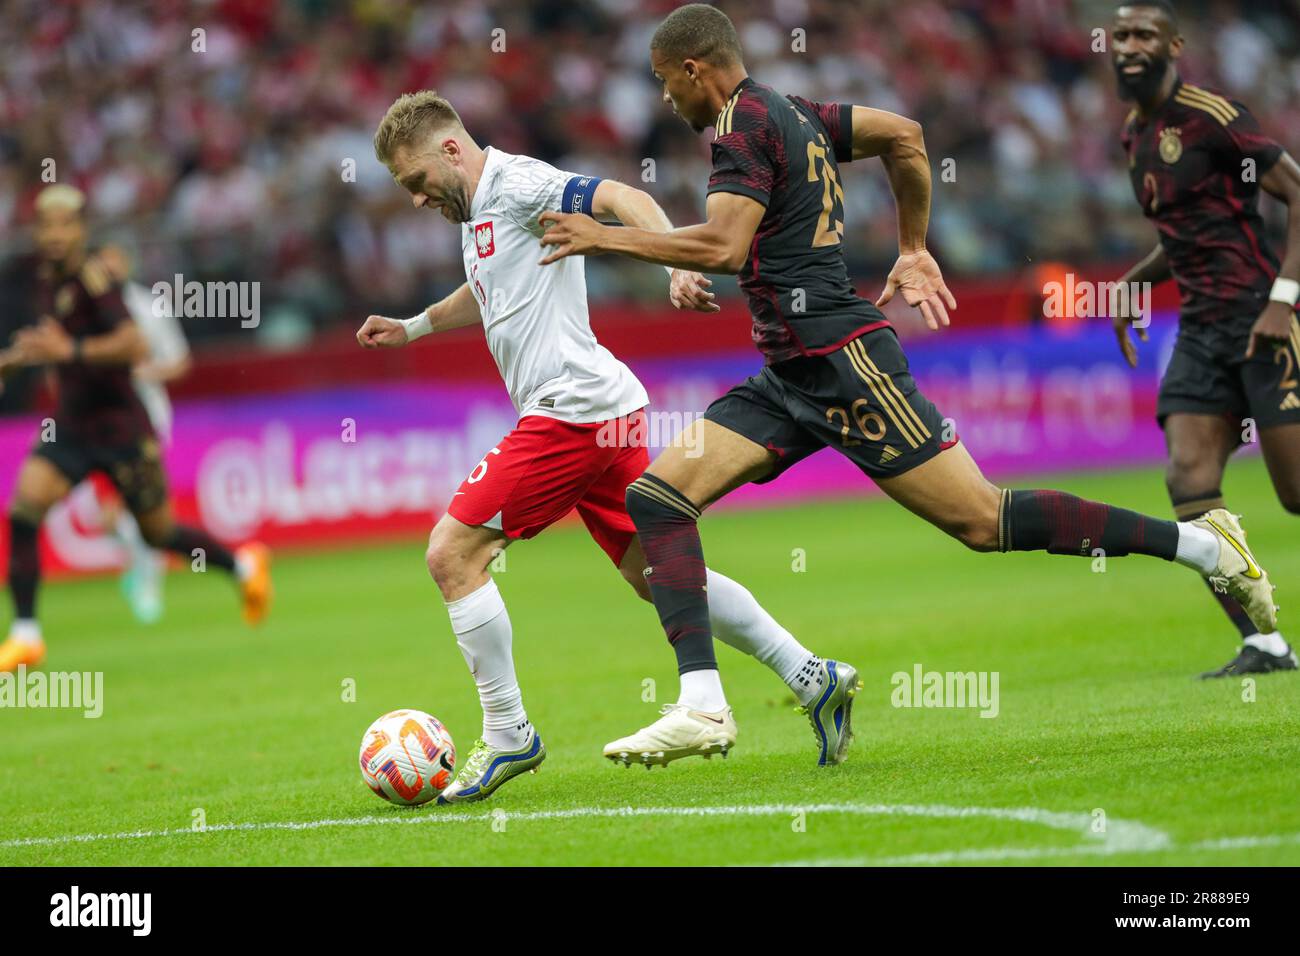 Jakub Blaszczykowski of Poland (L) and Malick Thiaw of Germany (R) in action during the Friendly match between Poland and Germany at PEG Narodowy.  Final score: Poland 1:0 Germany. (Photo by Grzegorz Wajda / SOPA Images/Sipa USA) Stock Photo